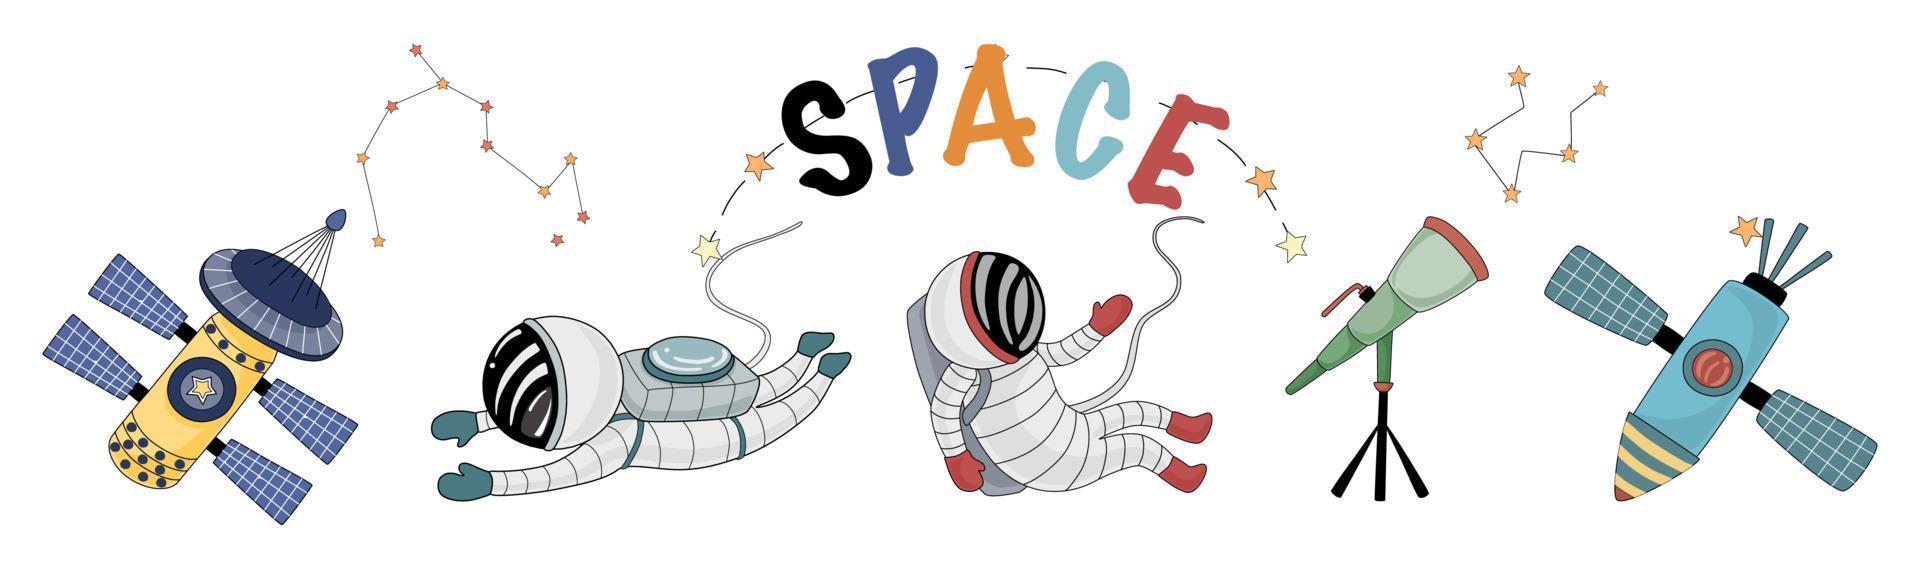 Set of space vector elements designed in doodle style on white background. Can be adapted to a variety of applications such as stickers, digital printing, children's arts, scrapbooks, kindergarten